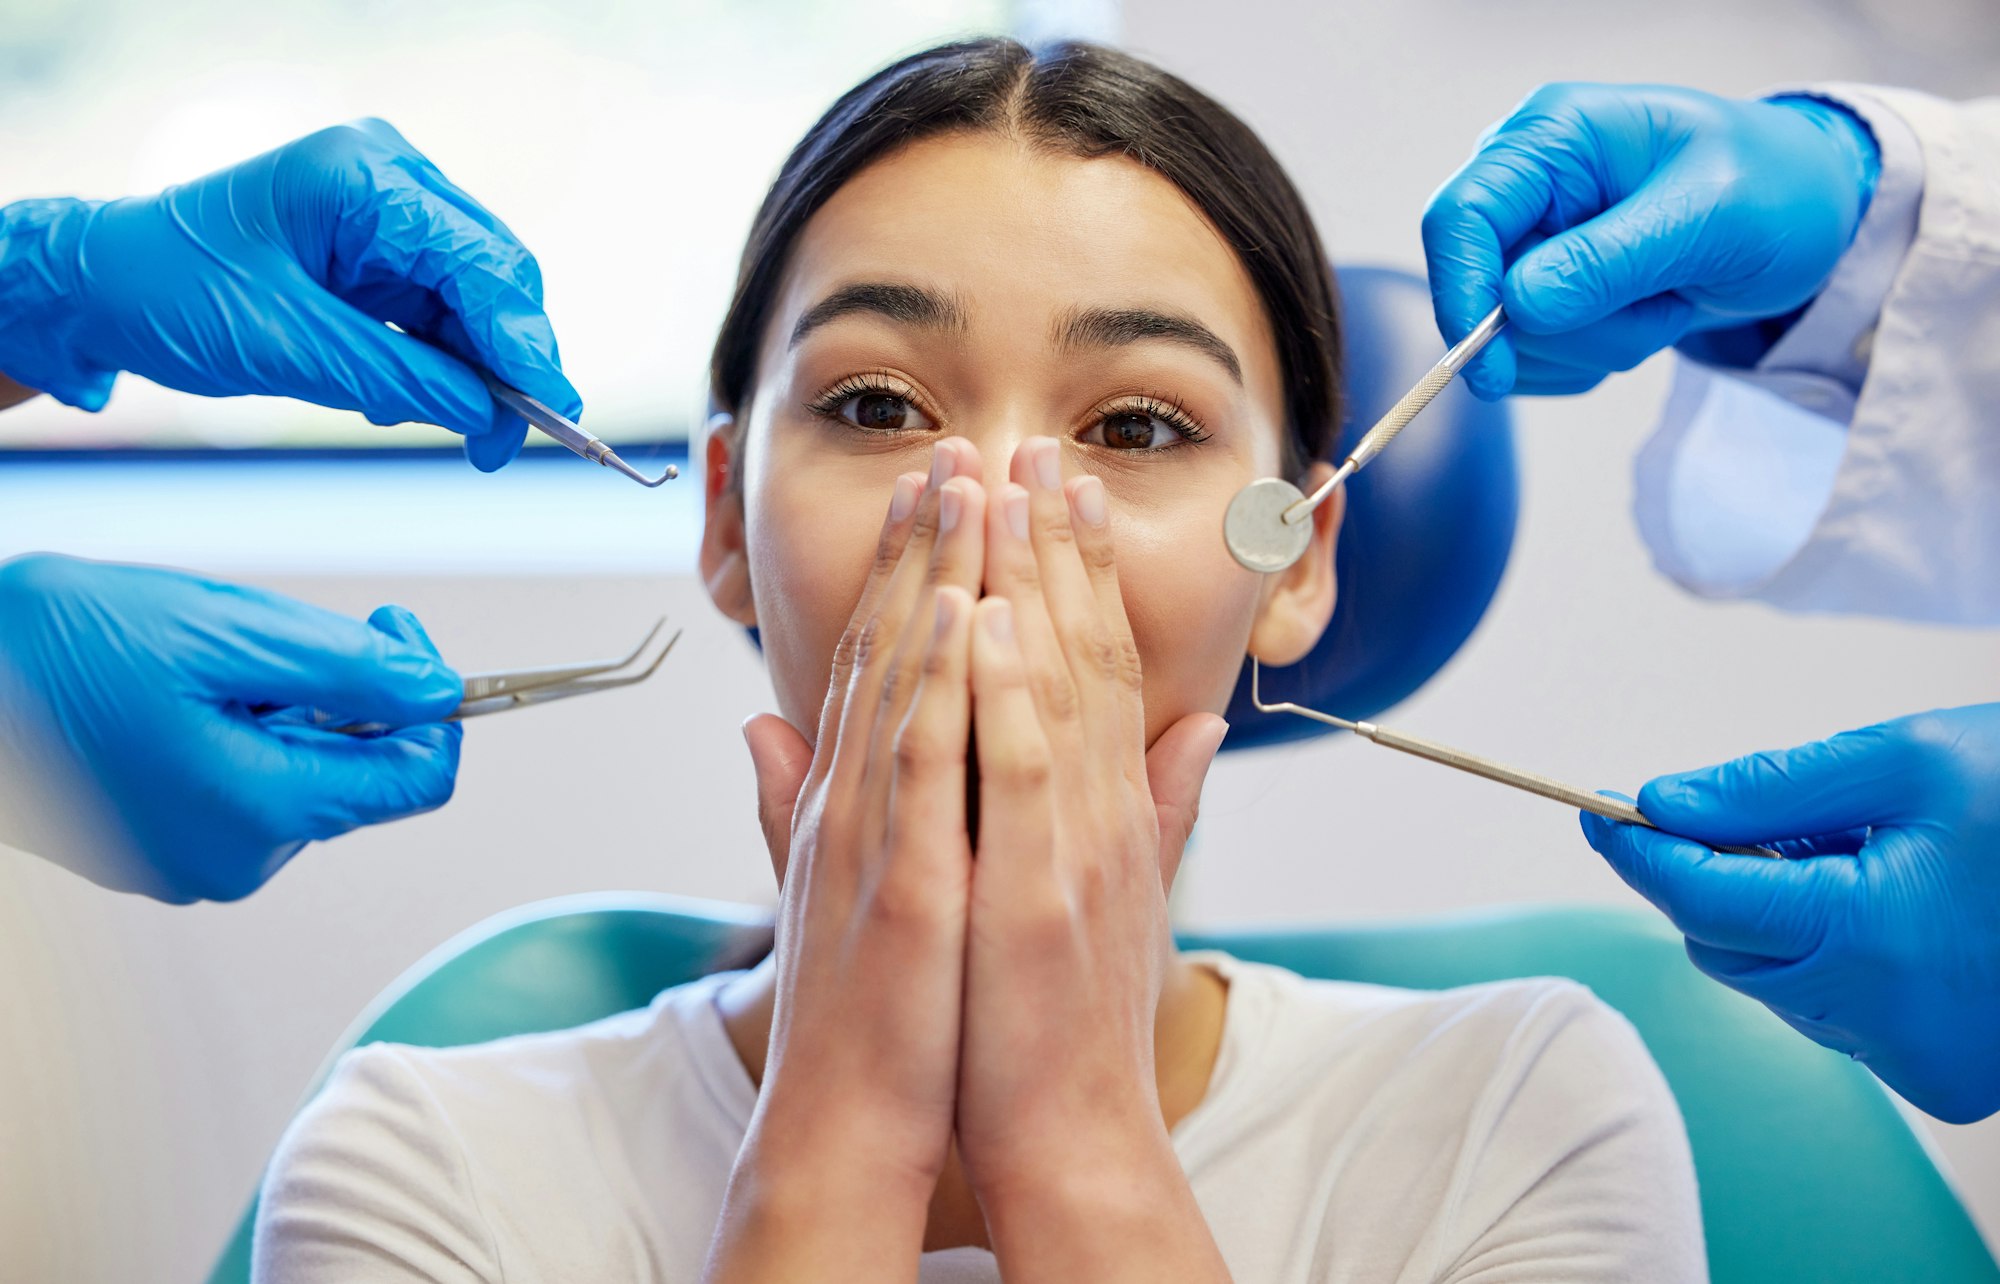 Shot of a young woman experiencing anxiety while having a dental procedure performed on her